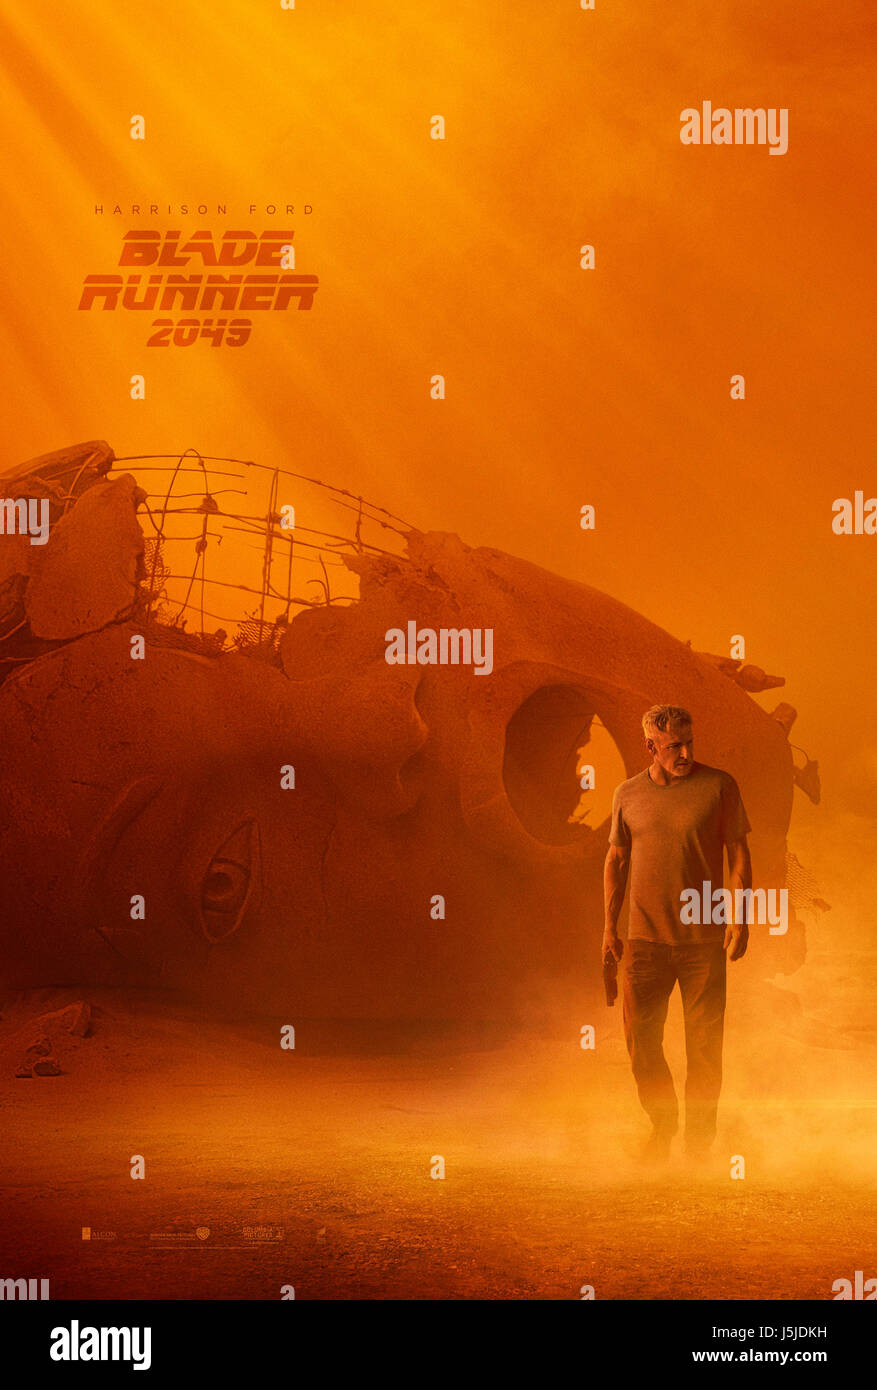 LEASE DATE: October 6, 2017 TITLE: Blade Runner 2049 STUDIO: Columbia Pictures DIRECTOR: Denis Villeneuve PLOT: Thirty years after the events of the first film, a new blade runner, LAPD Officer K (Ryan Gosling), unearths a long-buried secret that has the potential to plunge what's left of society into chaos. K's discovery leads him on a quest to find Rick Deckard (Harrison Ford), a former LAPD blade runner who has been missing for 30 years STARRING: Harrison Ford Poster Art (Credit: © Columbia Pictures/Entertainment Pictures/ZUMAPRESS.com) Stock Photo